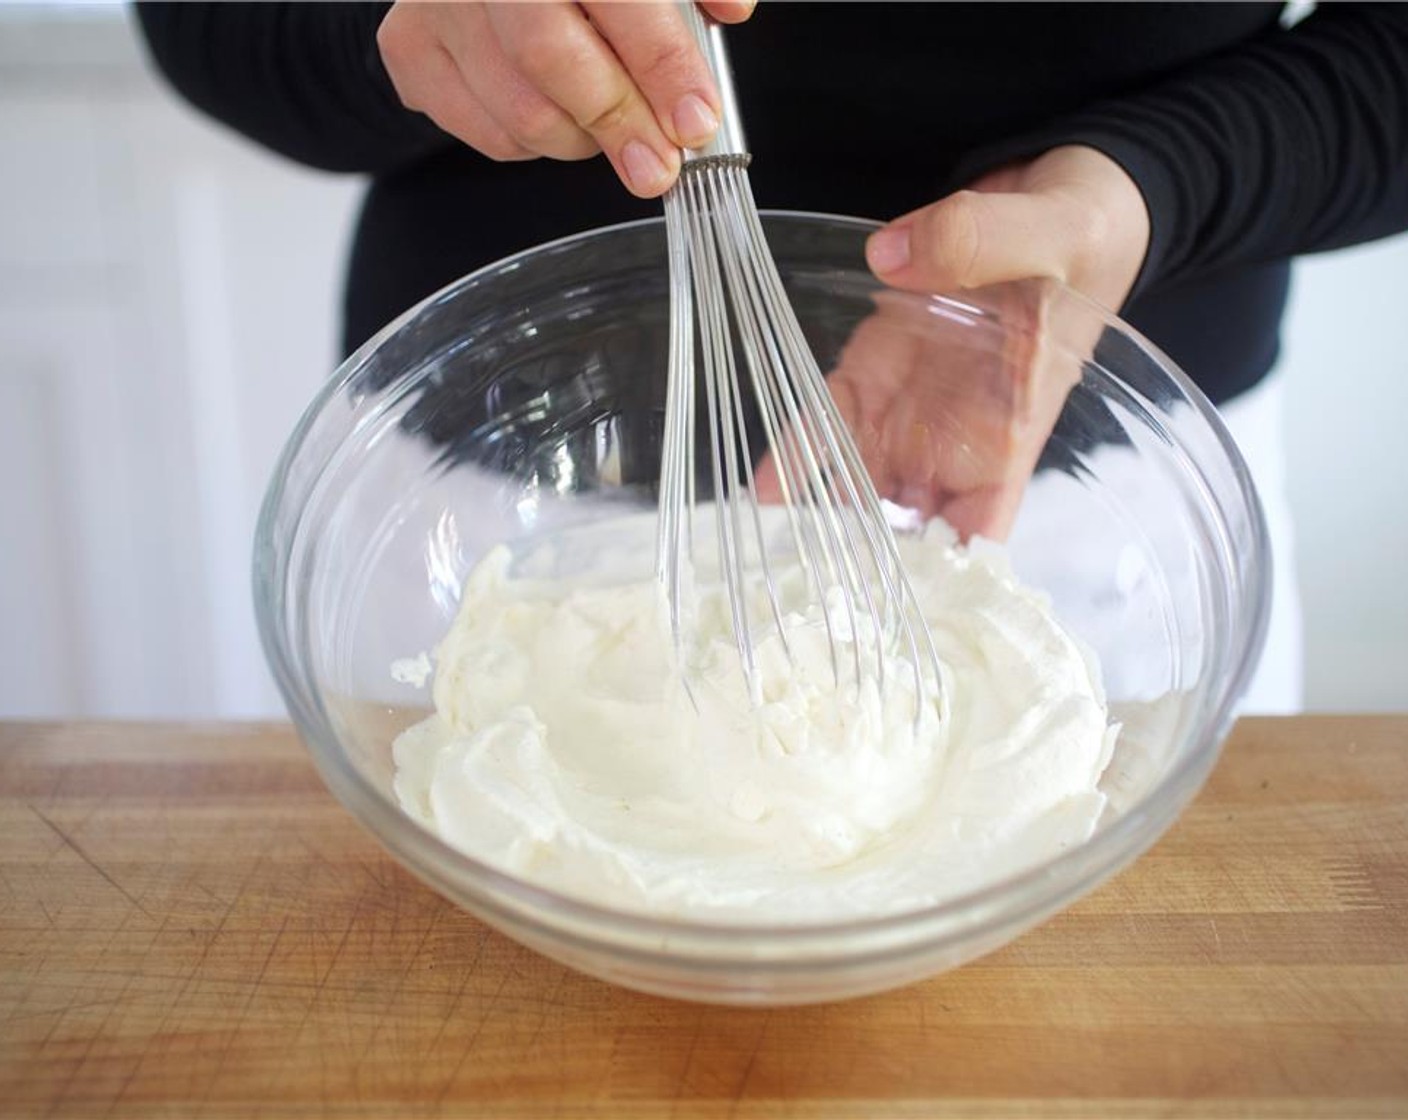 step 9 Place half of Whipping Cream (4 fl oz) into the chilled bowl. Whisk rapidly until the cream reaches stiff peaks, about 11 minutes.